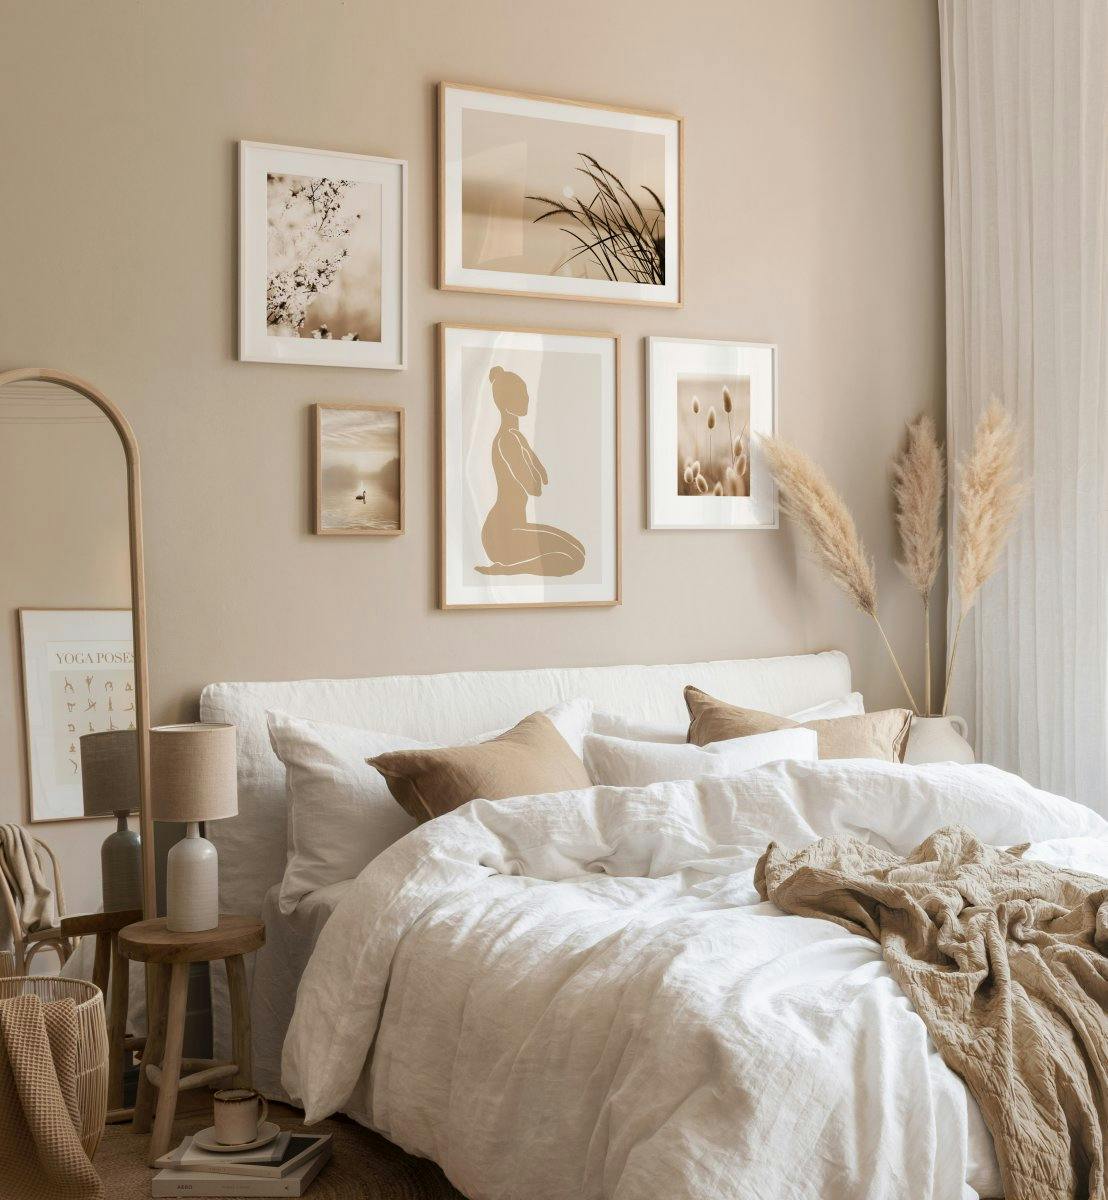 Photographs from nature and illustrations in calm colors for bedroom